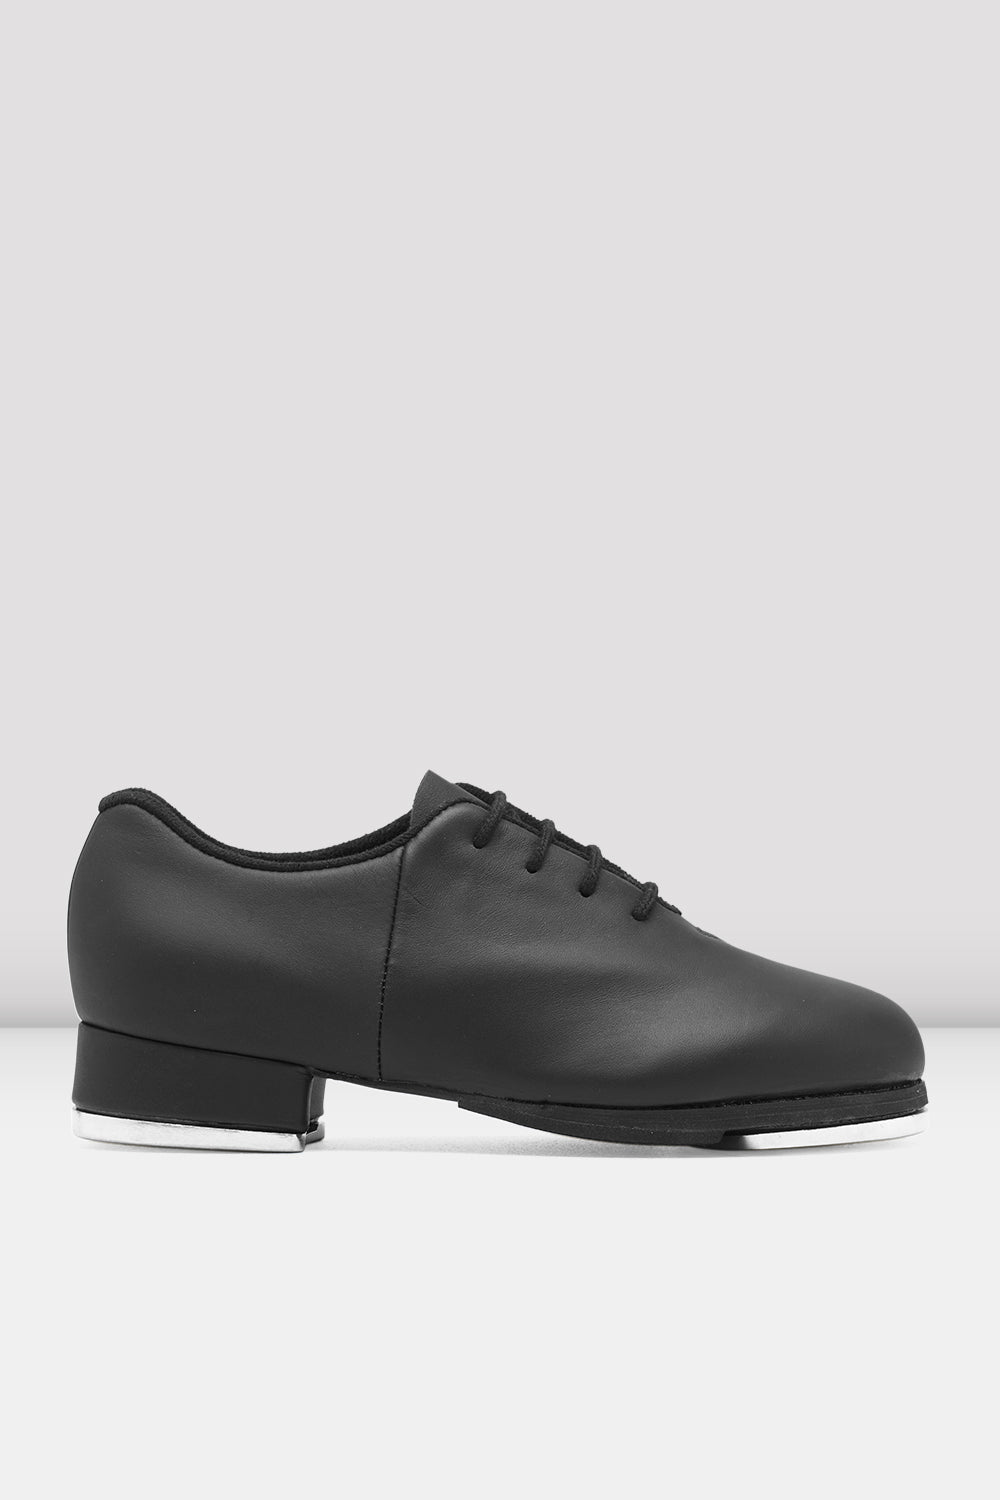 BLOCH Ladies Sync Tap Leather Tap Shoes, Black Leather